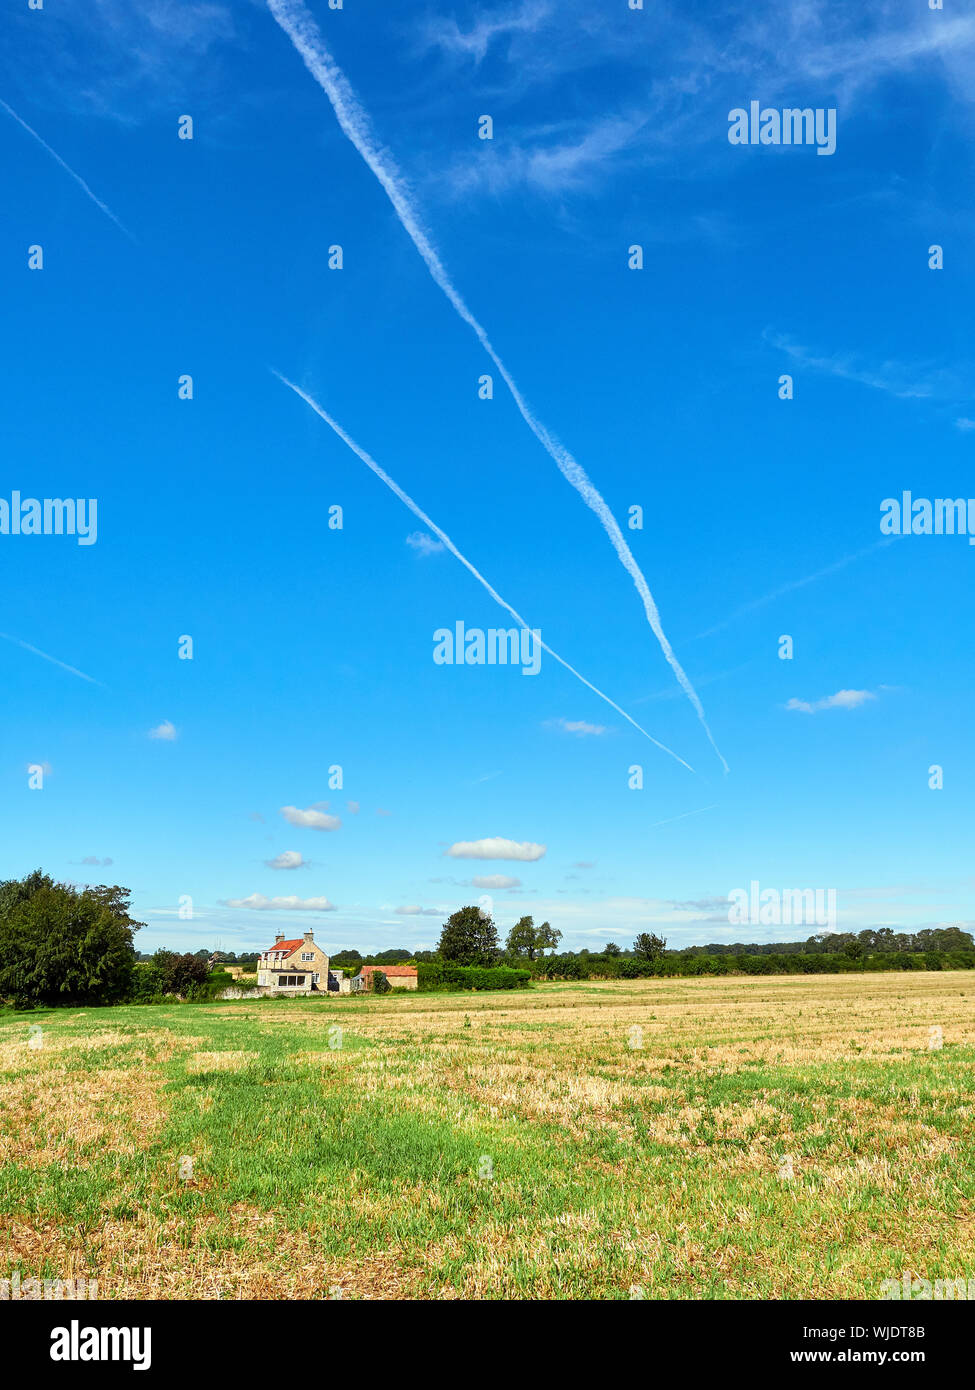 Aeroplane contrails in a blue sky over a stubble field with a stone house in the distance Stock Photo